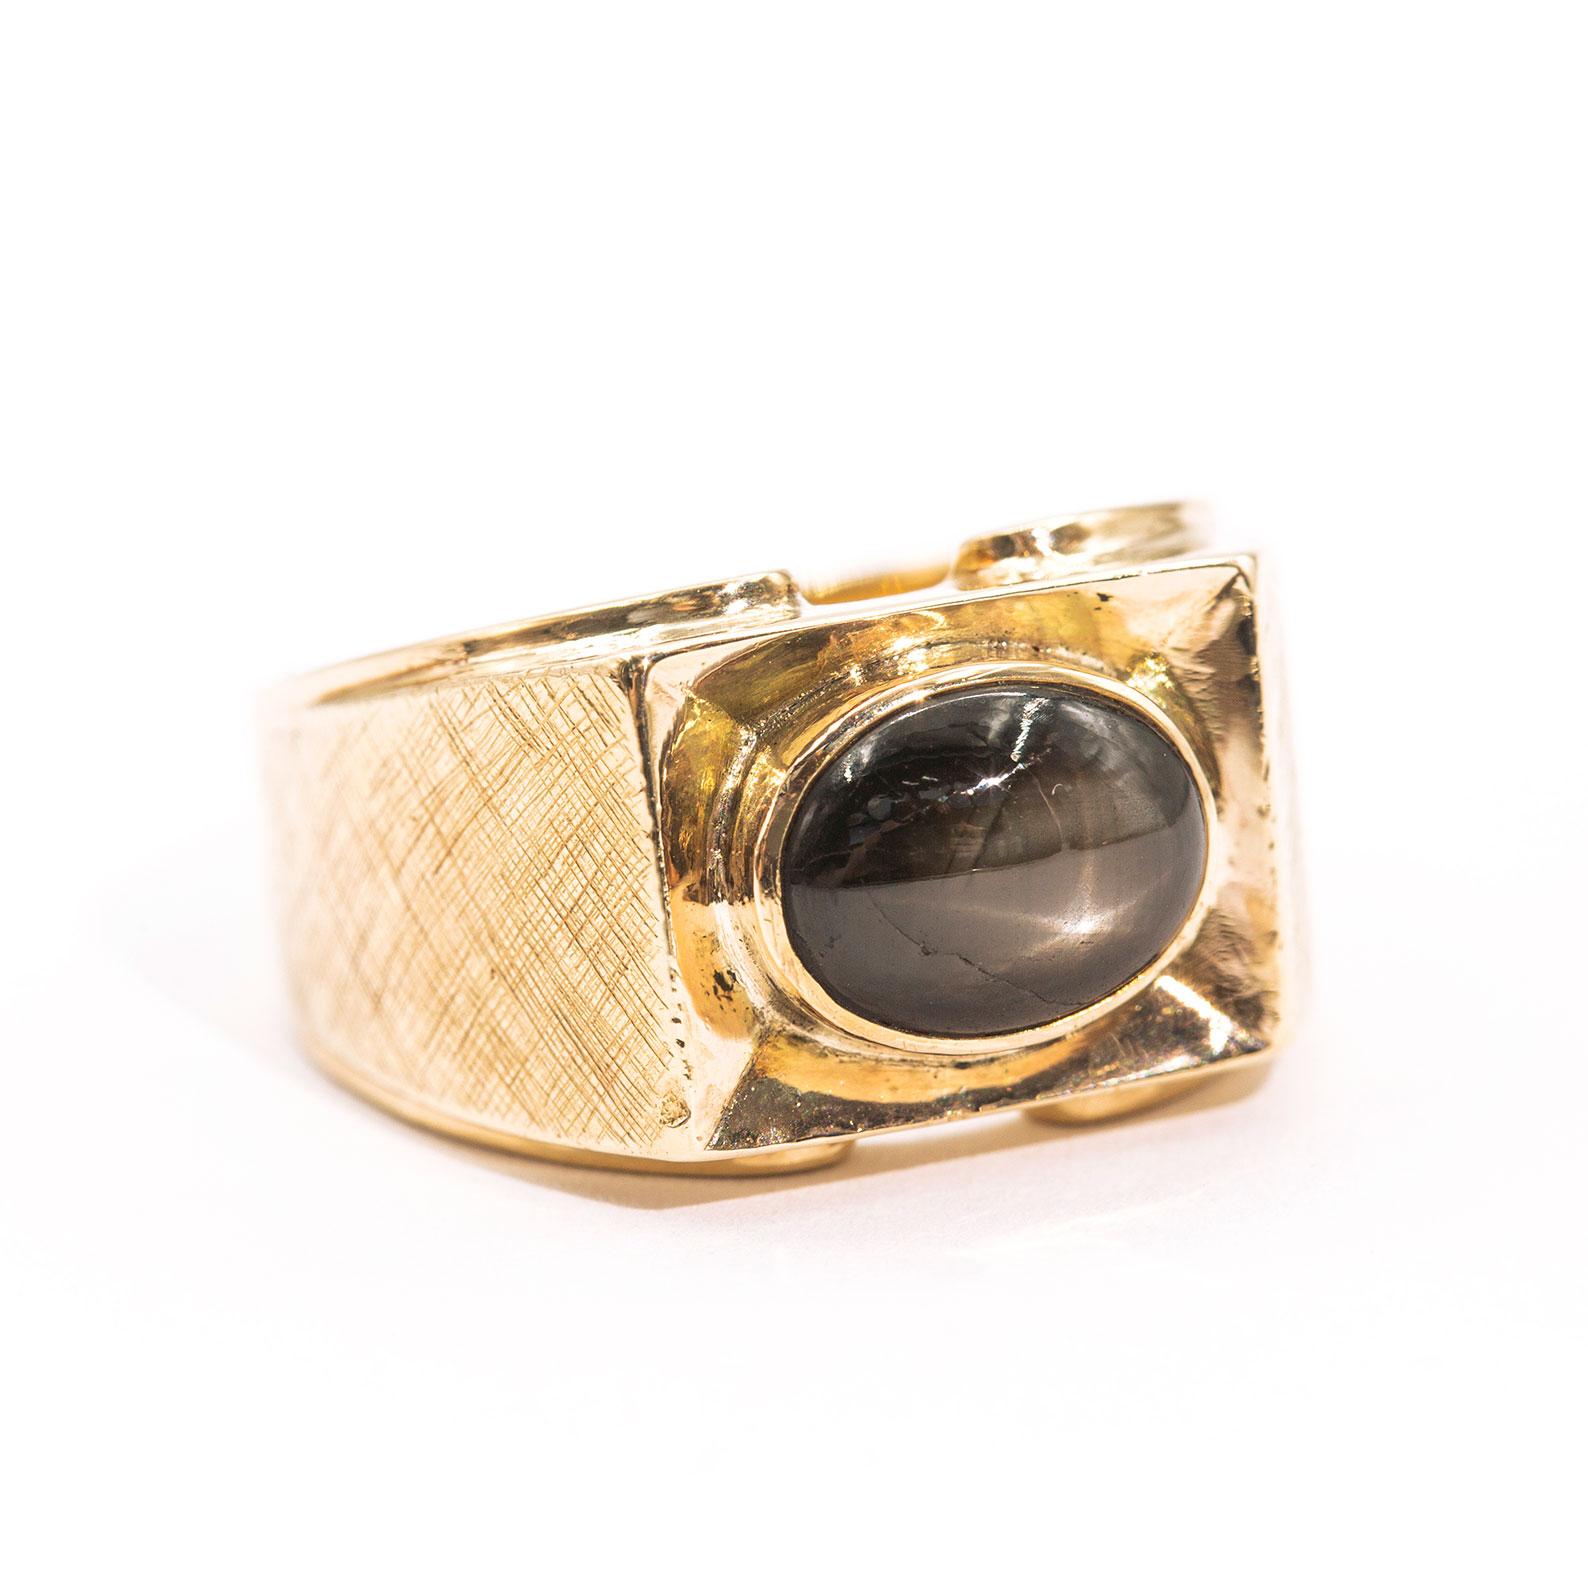 Carefully crafted in 18 carat yellow gold, this handsome vintage signet ring features a 9x7 millimetre 6 ray star natural brown sapphire. We have named this dapper ring The Thomas Ring. With fine textured detailing on the band and the rectangular